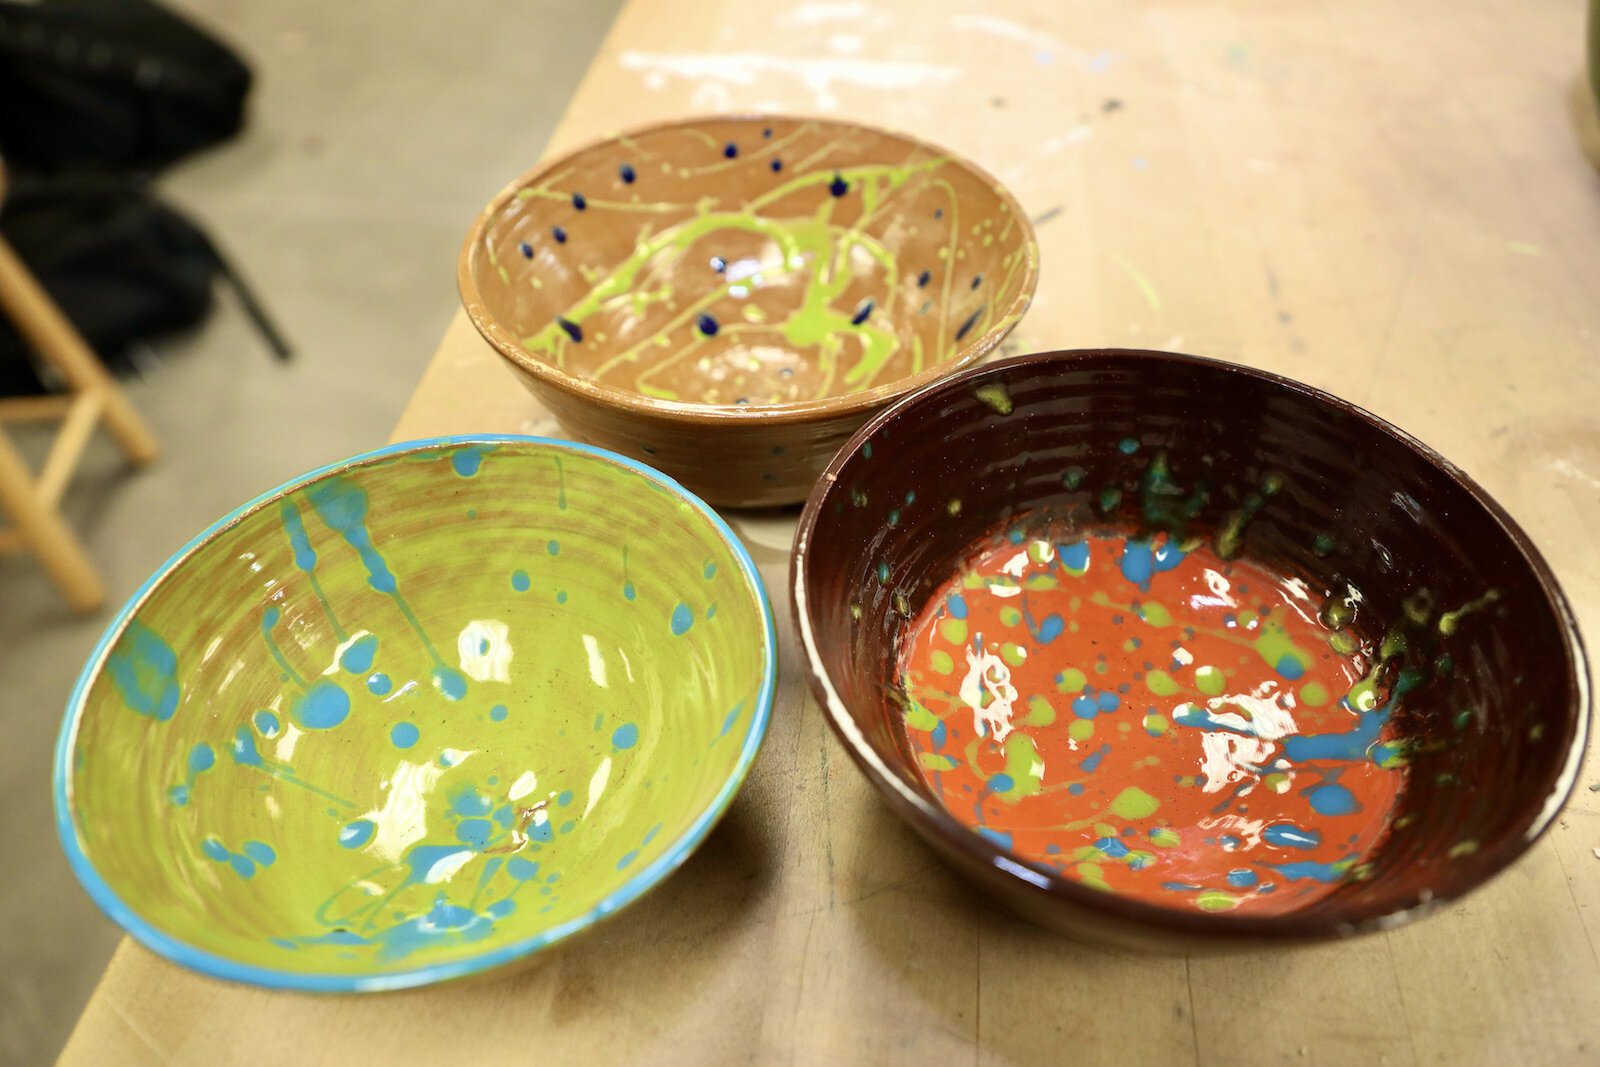 Springfield High School art students contributed to the success of this year's Empty Bowl fundraiser that brought in more than $400,000 to Second Harvest Food Bank.